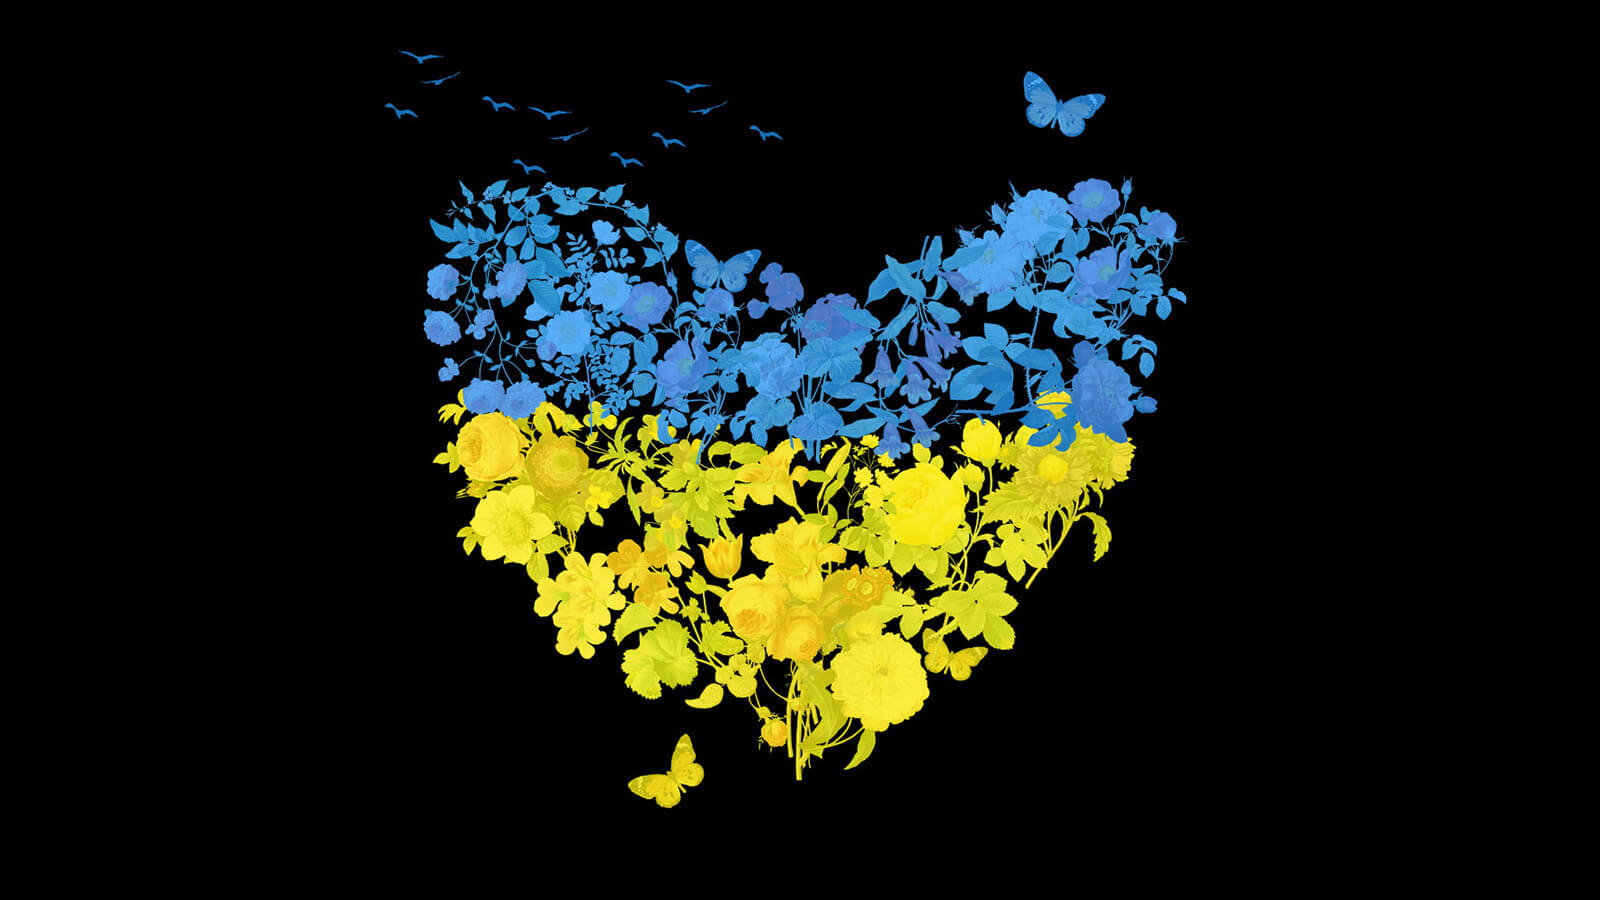 An image representing Ukraine: shape of a heart made up of yellow and blue images of flowers and butterflies